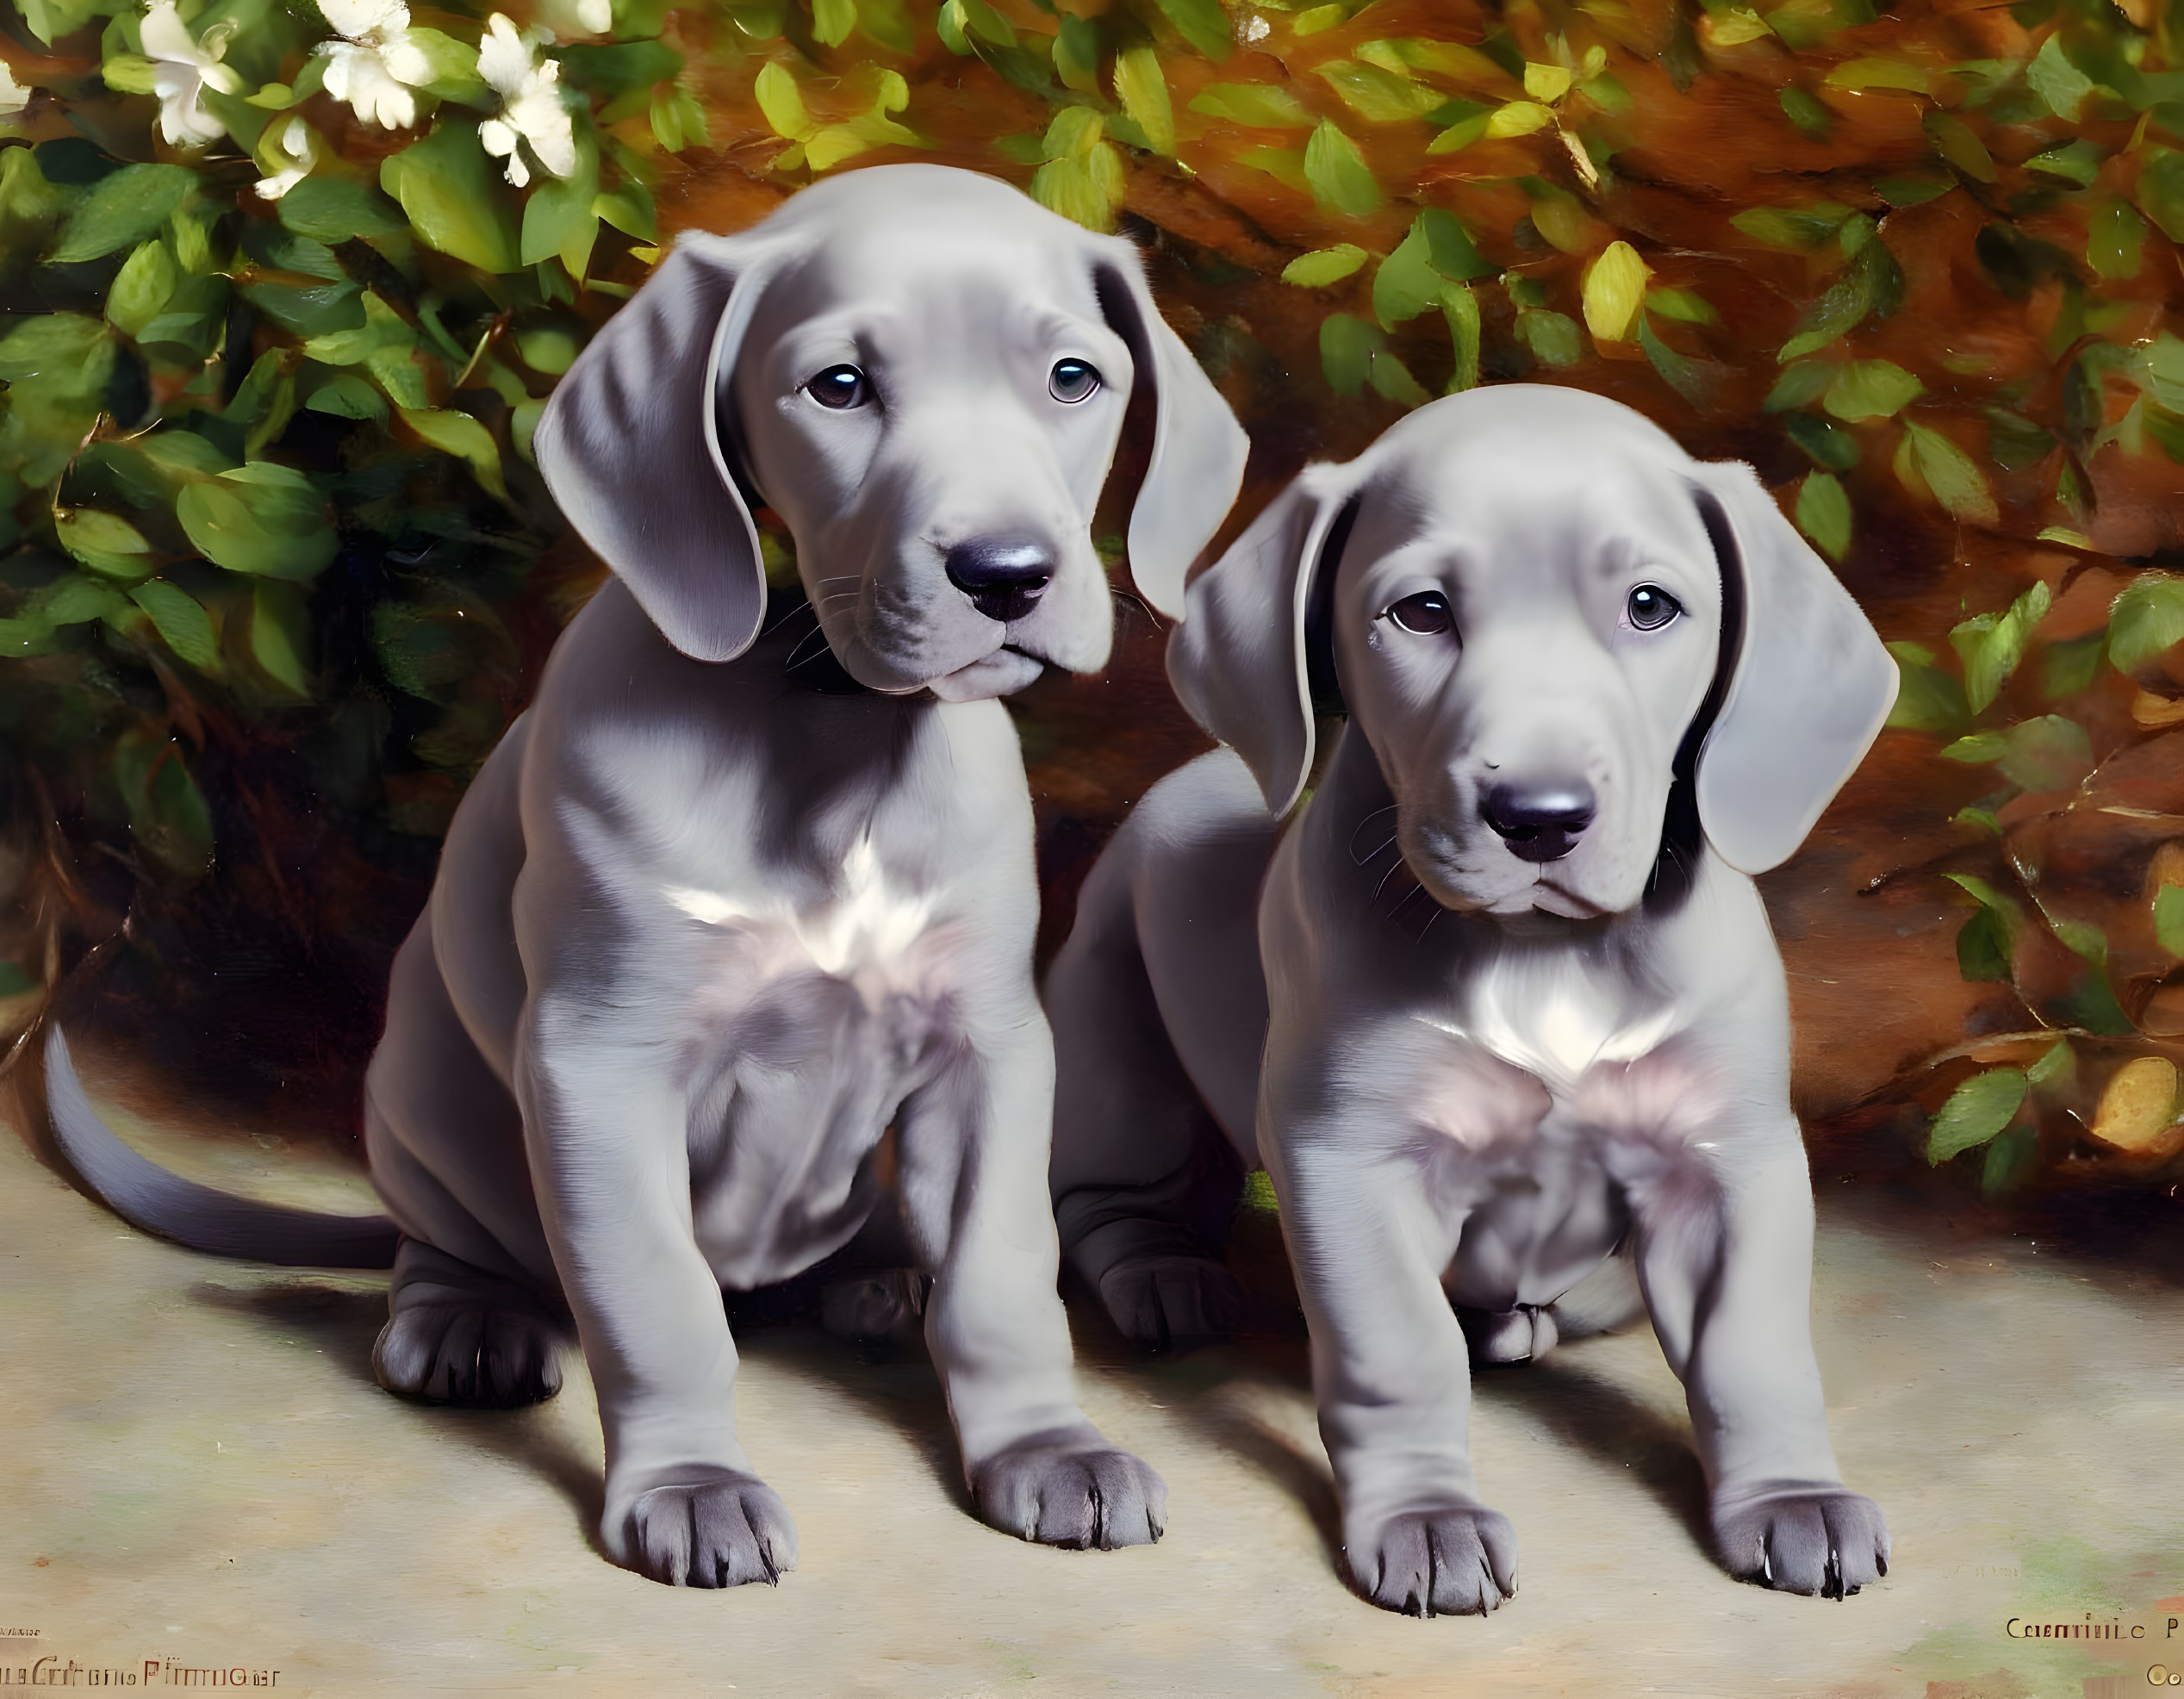 Two Gray Weimaraner Puppies Among Green Foliage and White Flowers